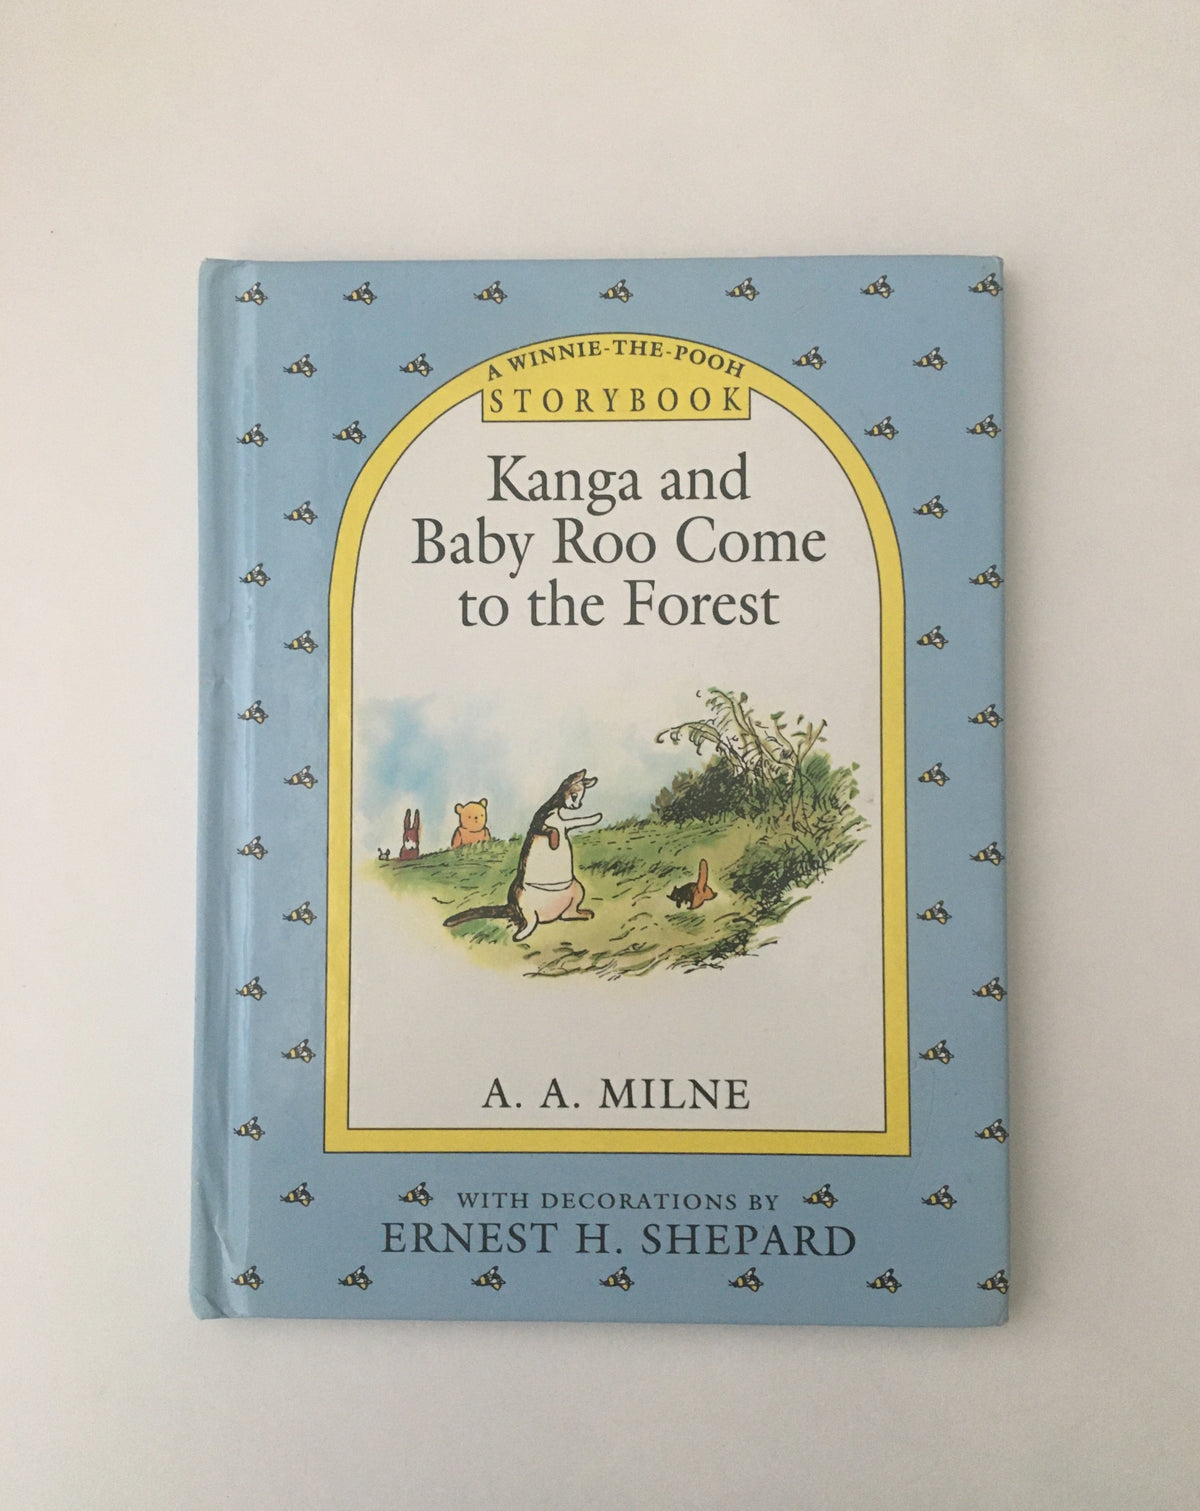 Kanga and Baby Roo Come to the Forest by A.A. Milne